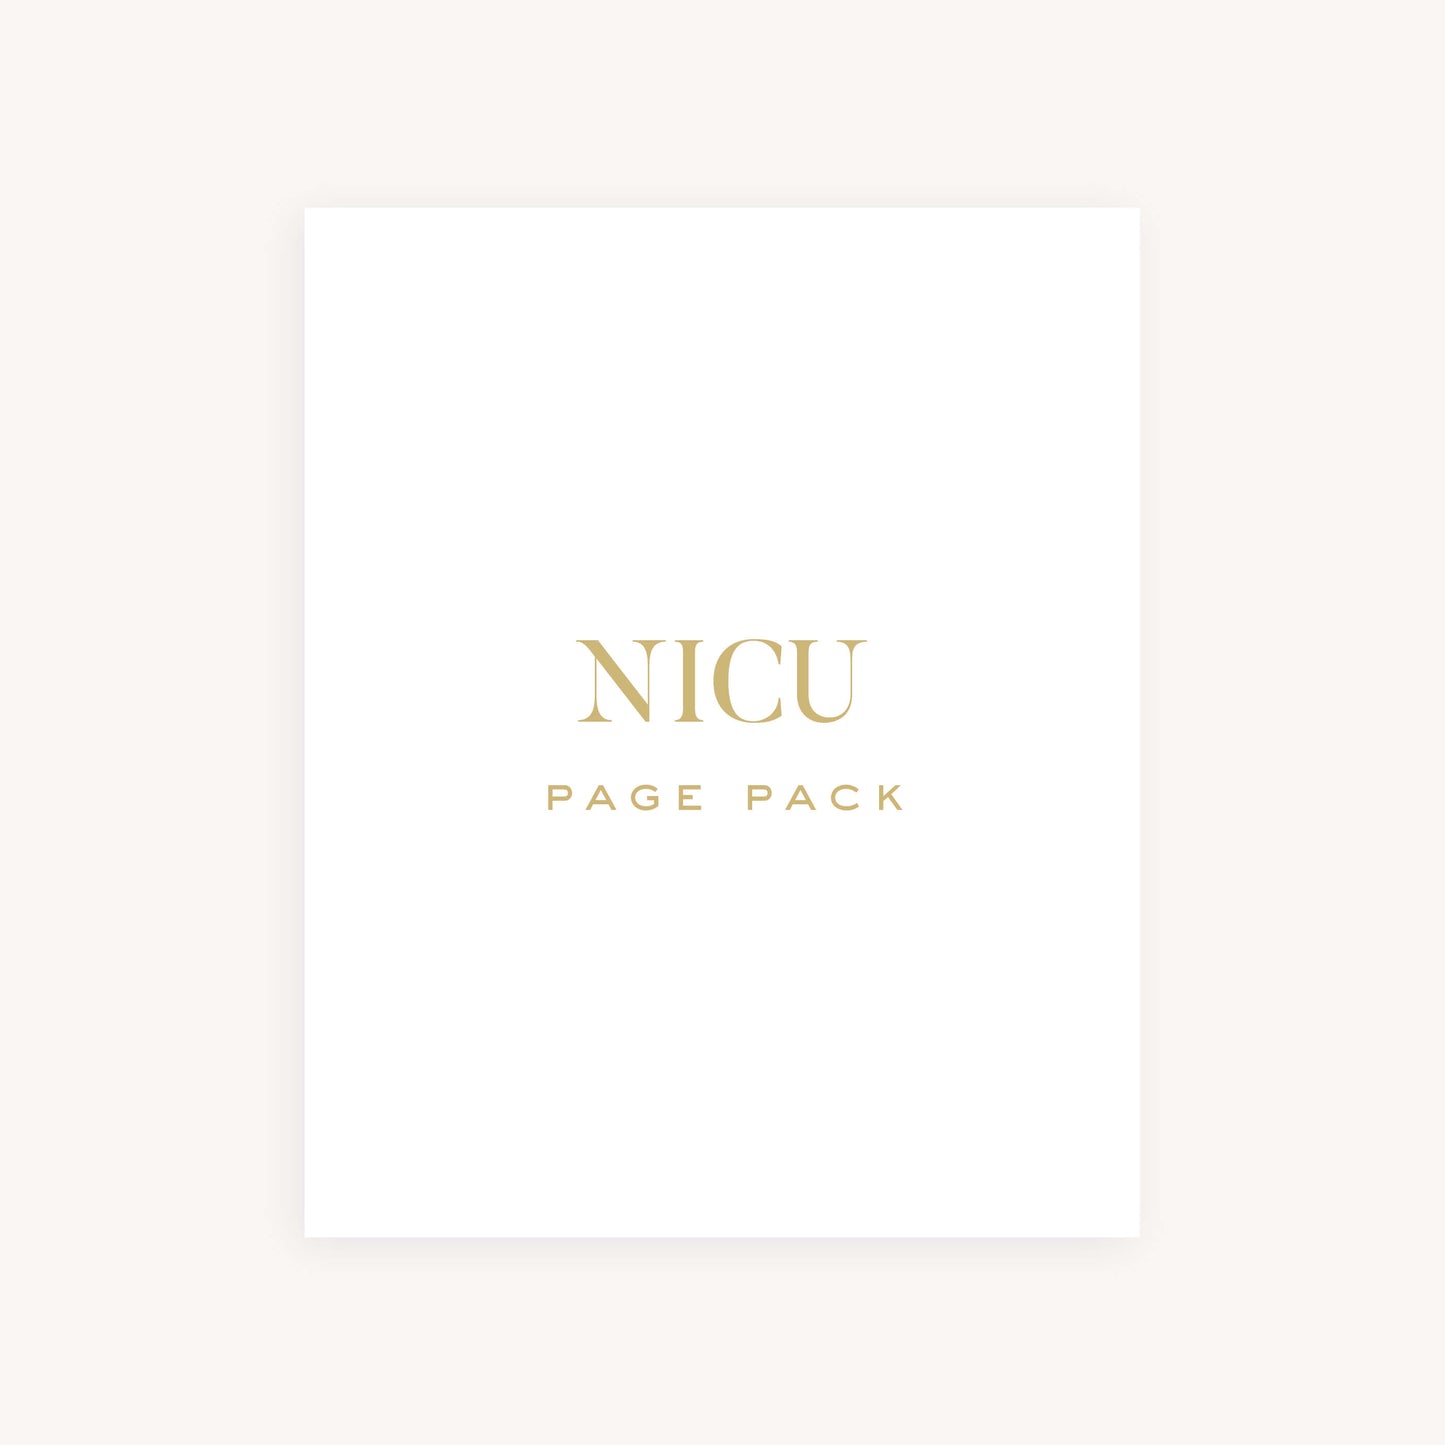 NICU BABY BOOK PAGE PACK